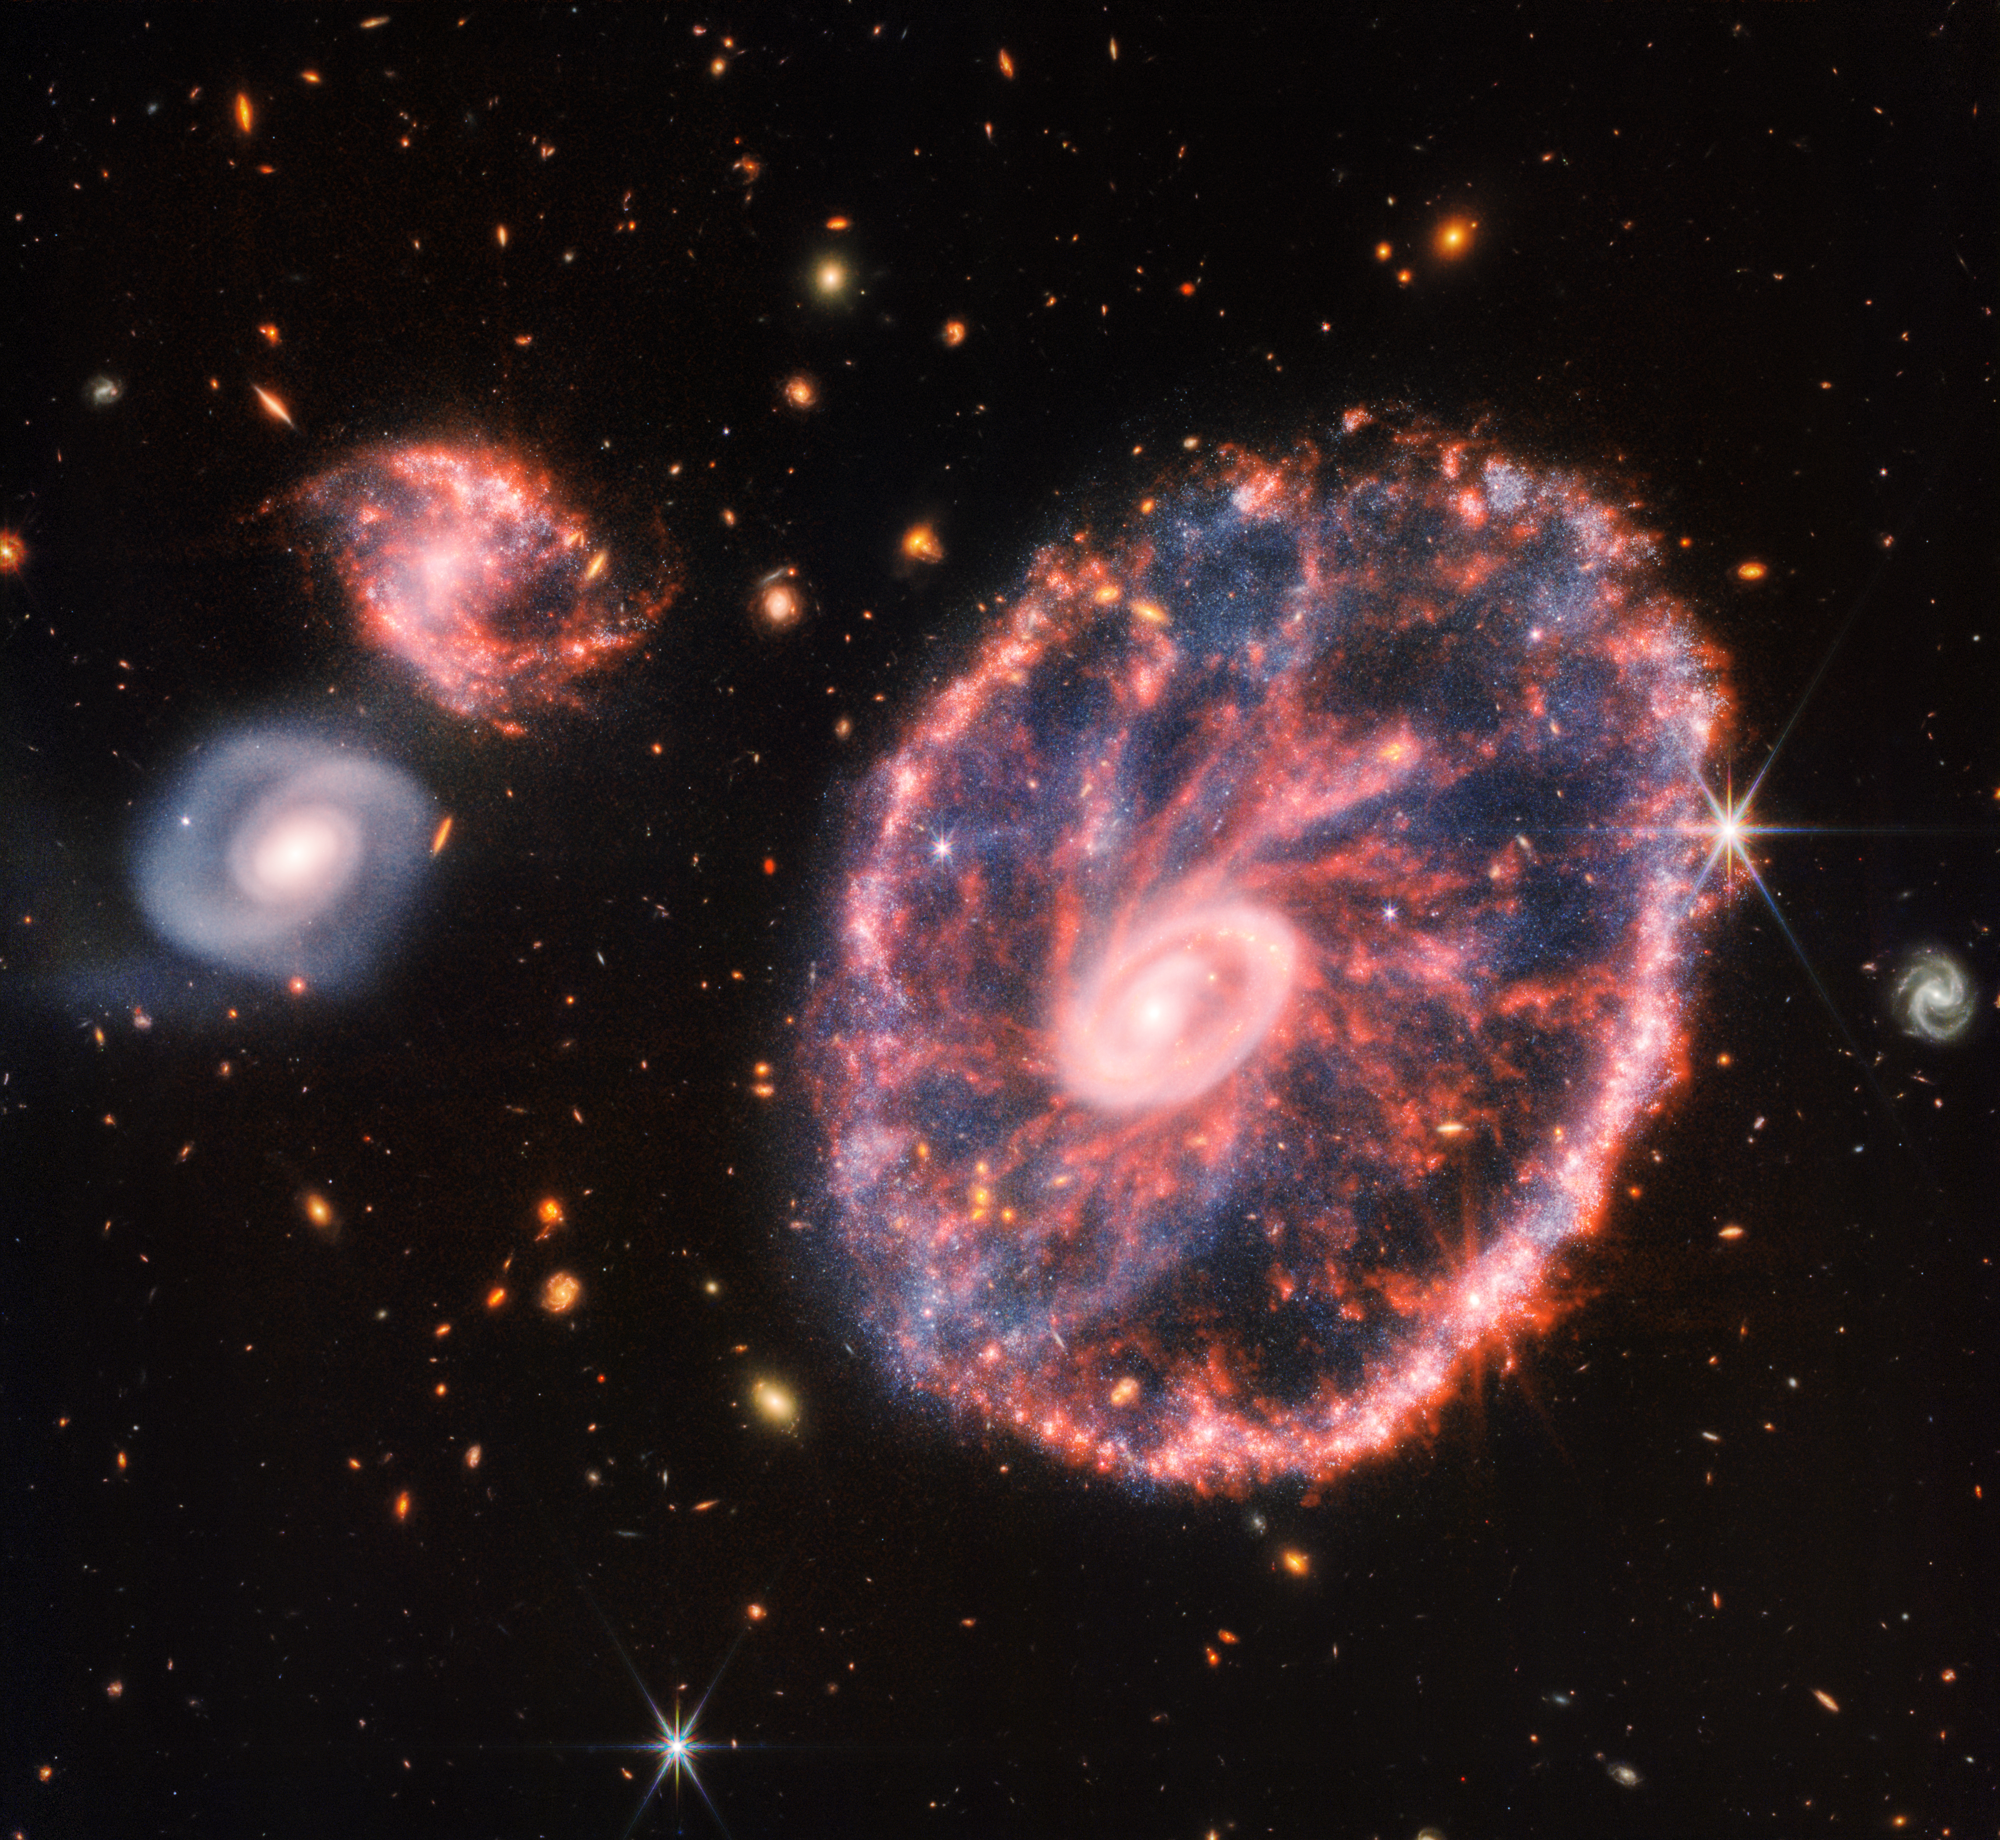 A large pink, speckled galaxy resembling a wheel with with a small, inner oval, with dusty blue in between on the right. Two smaller spiral galaxies about the same size are to the left, all against a black background.